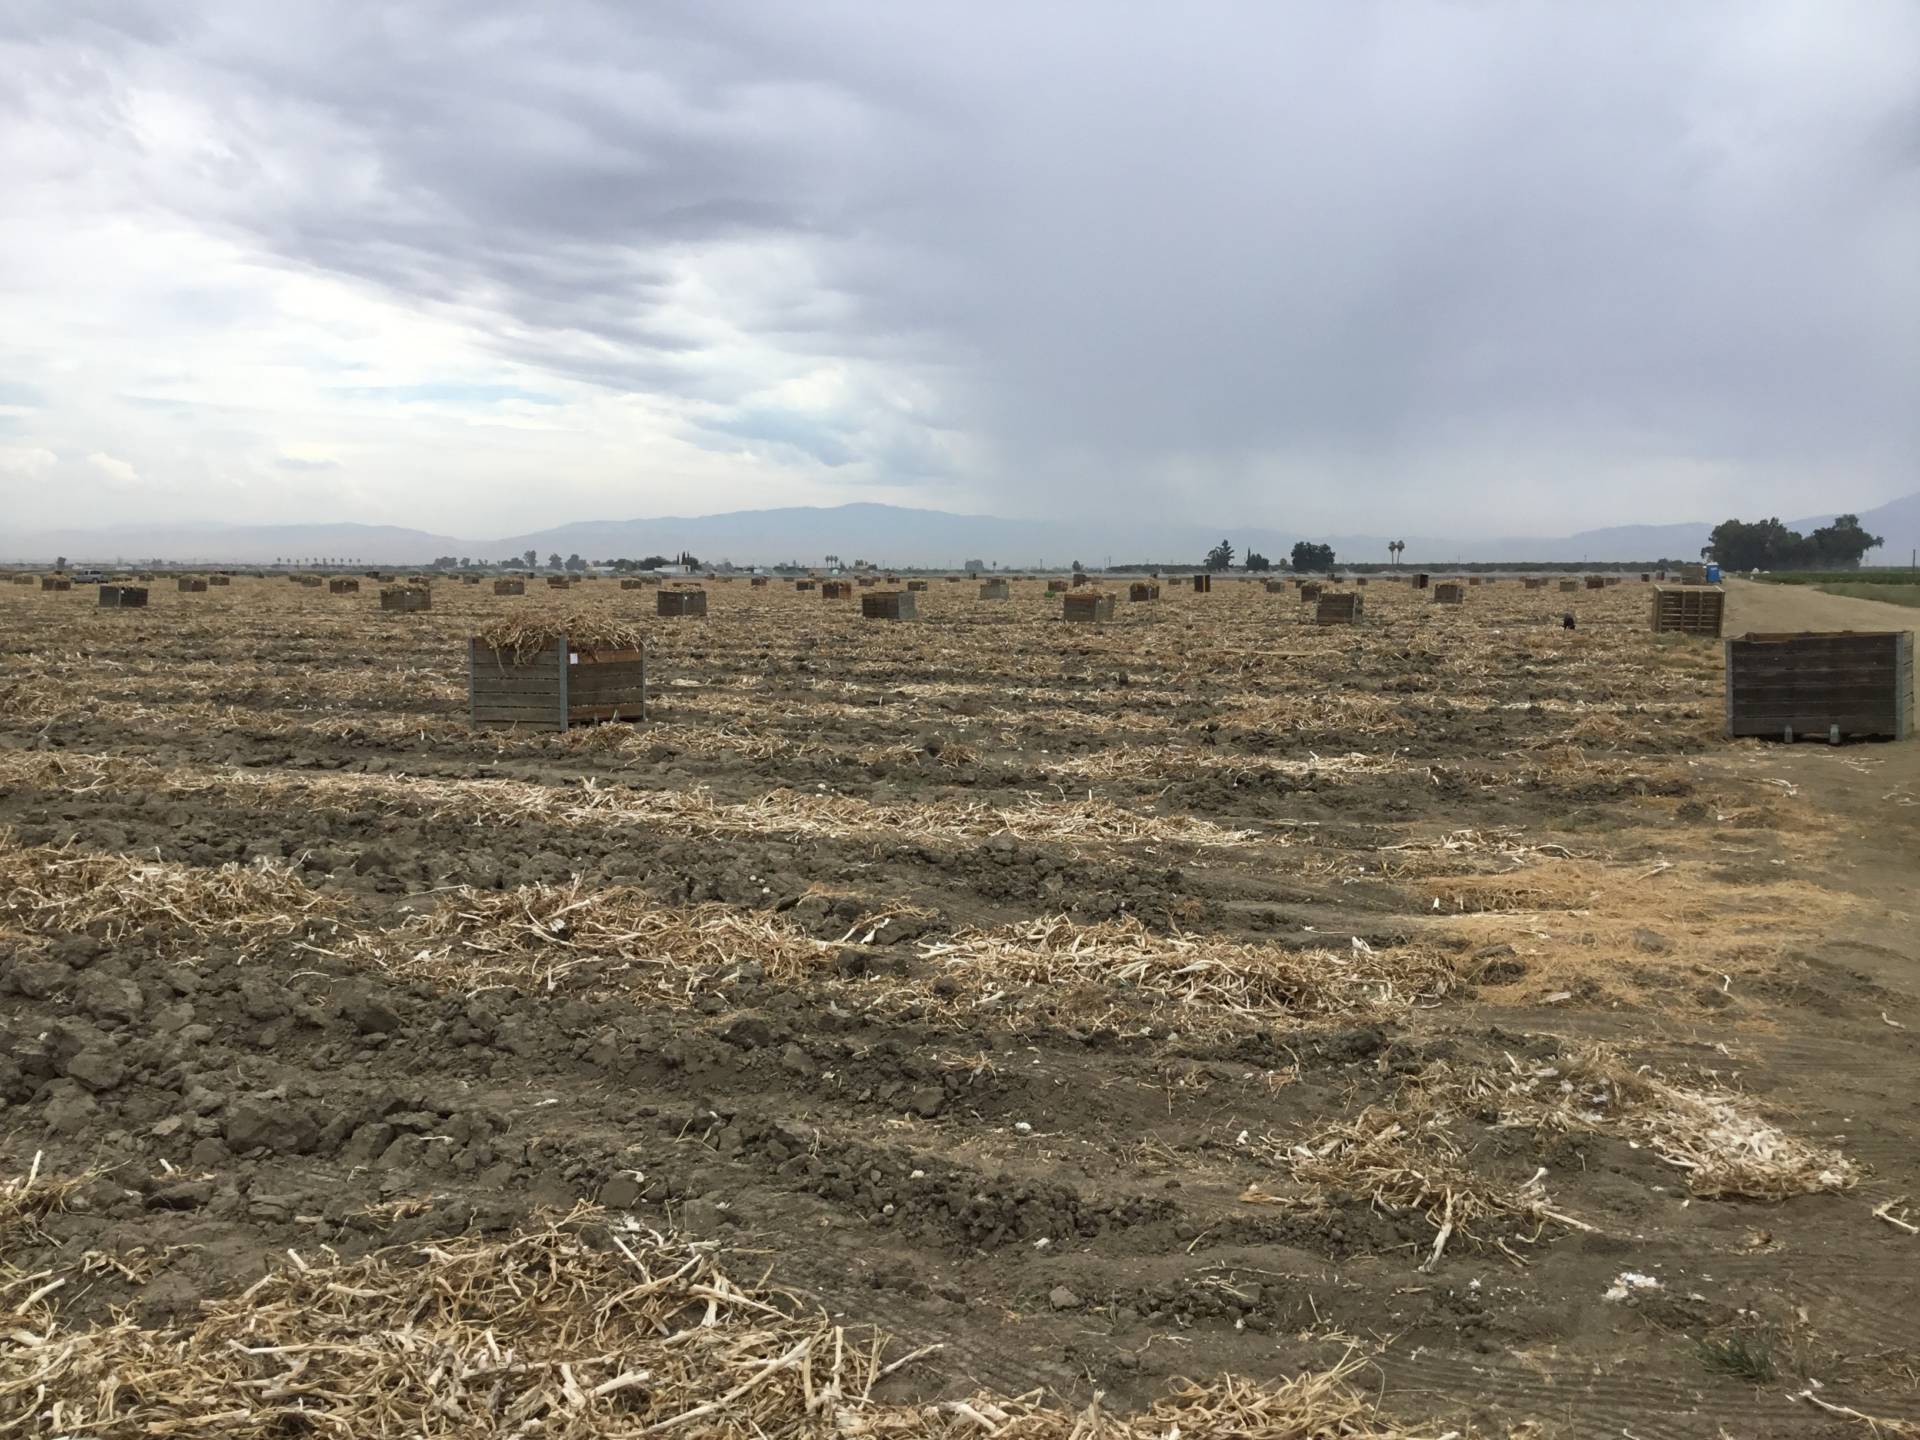 A garlic field where 92 farmworkers were sickened after being exposed to pesticide drifting from a nearby site in August 2017.  Kern County Department of Agriculture